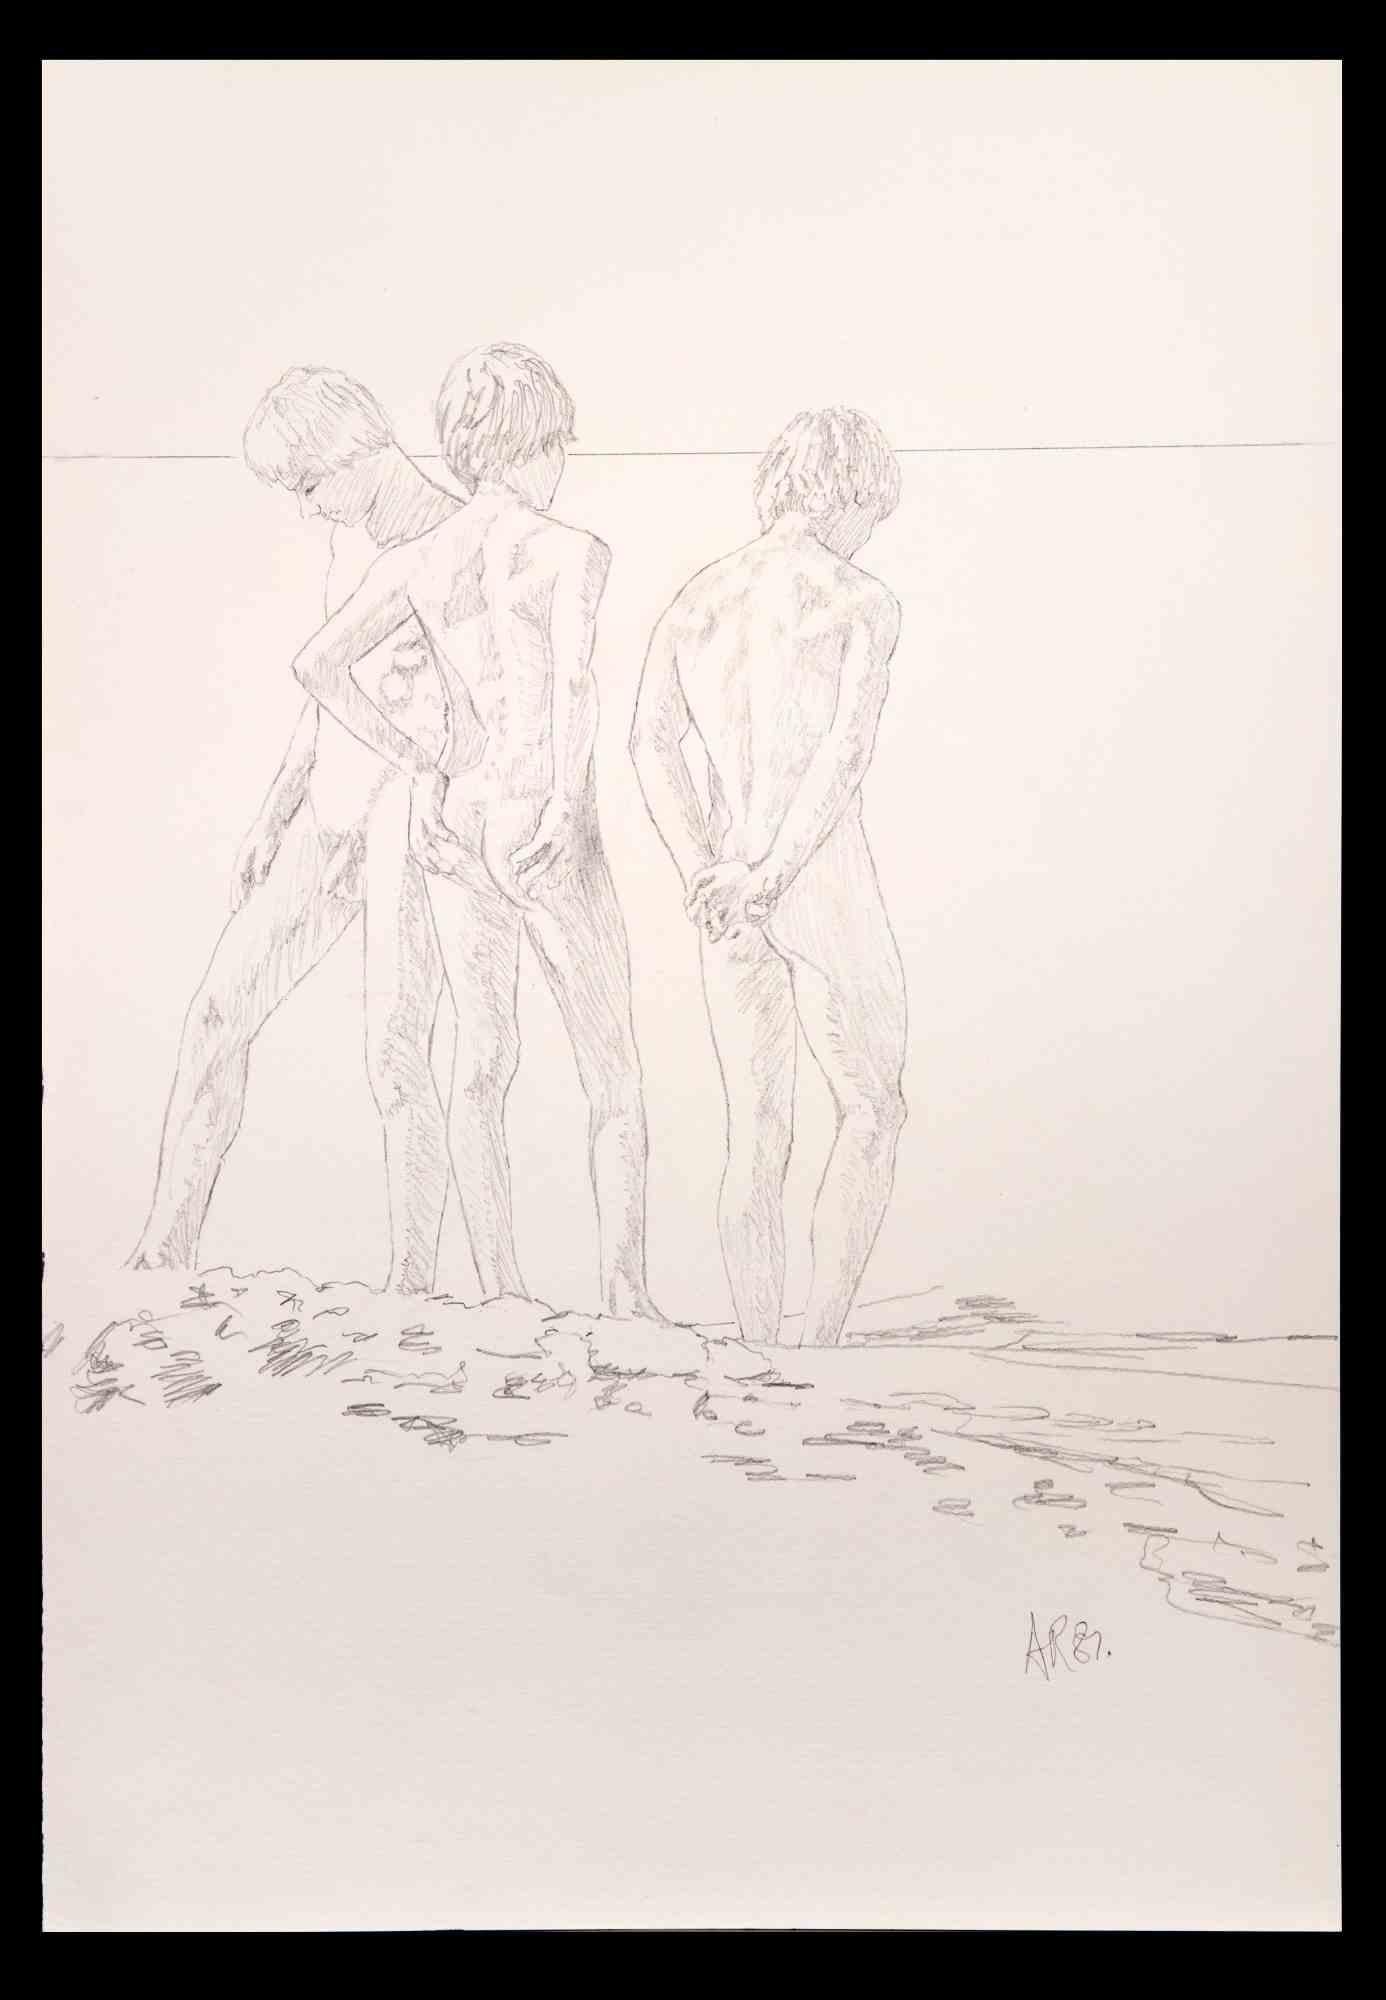  Teens at the beach  is an original drawing on pencil realized by Anthony Roaland in 1982. Hand-signed and dated by the artist on the lower right margin. 

The three boys are represented with a harmonious style.

Good conditions.
